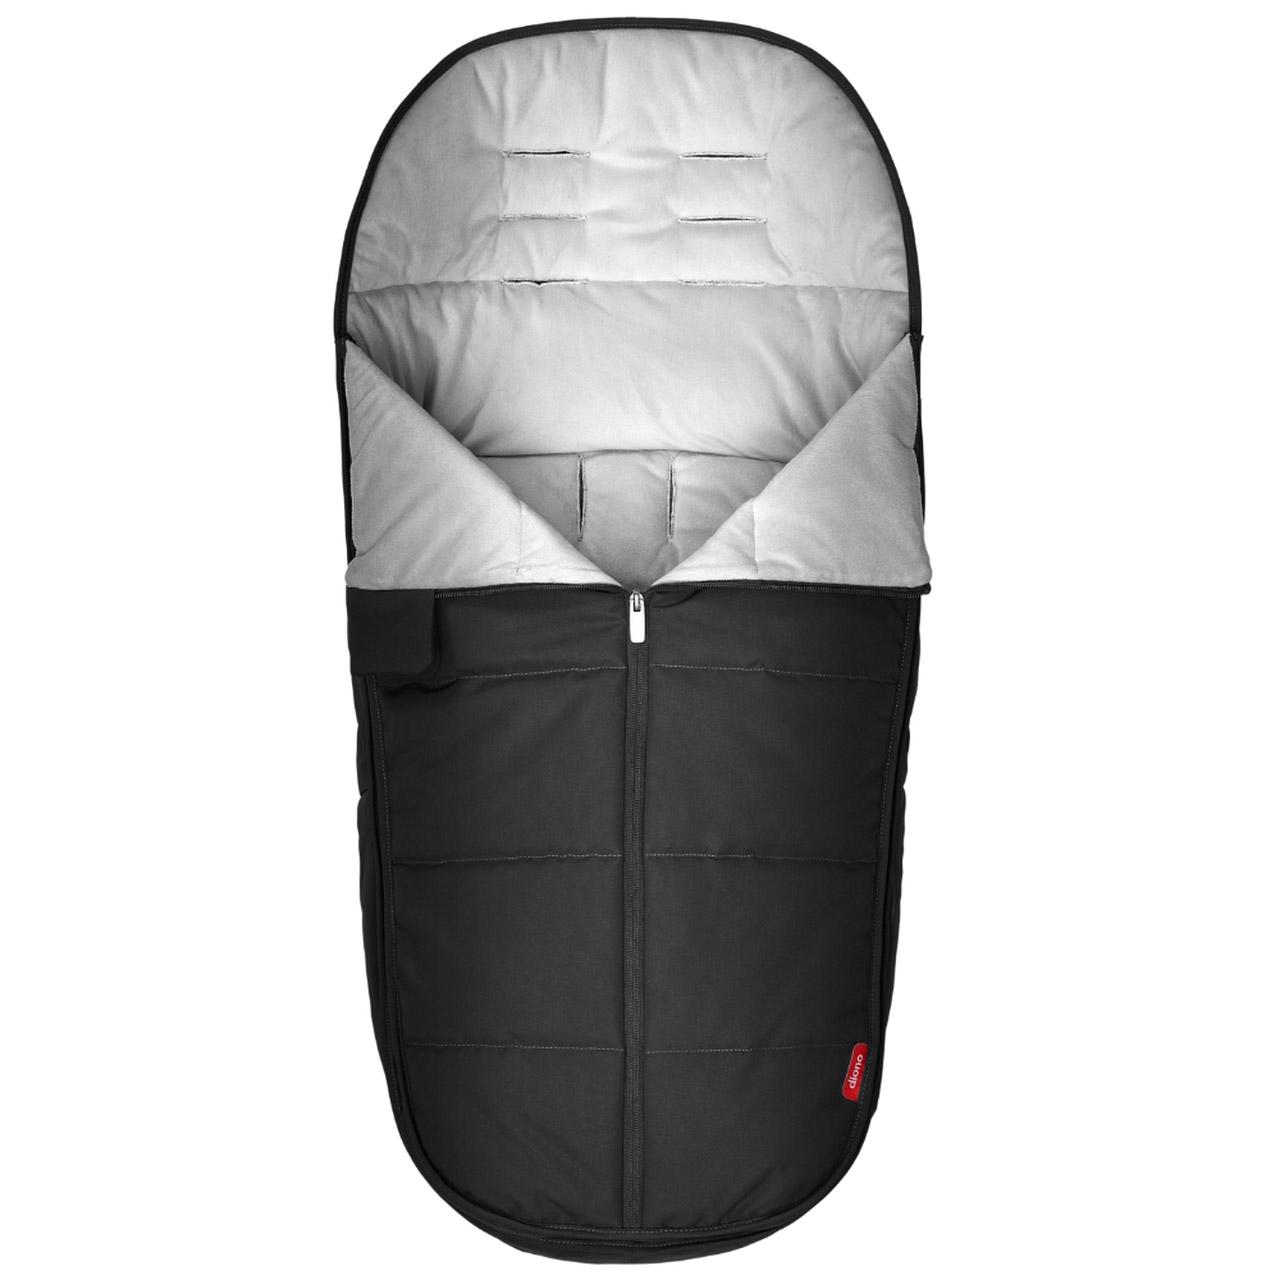 Diono All Weather Stroller Footmuff for $30.98 Shipped